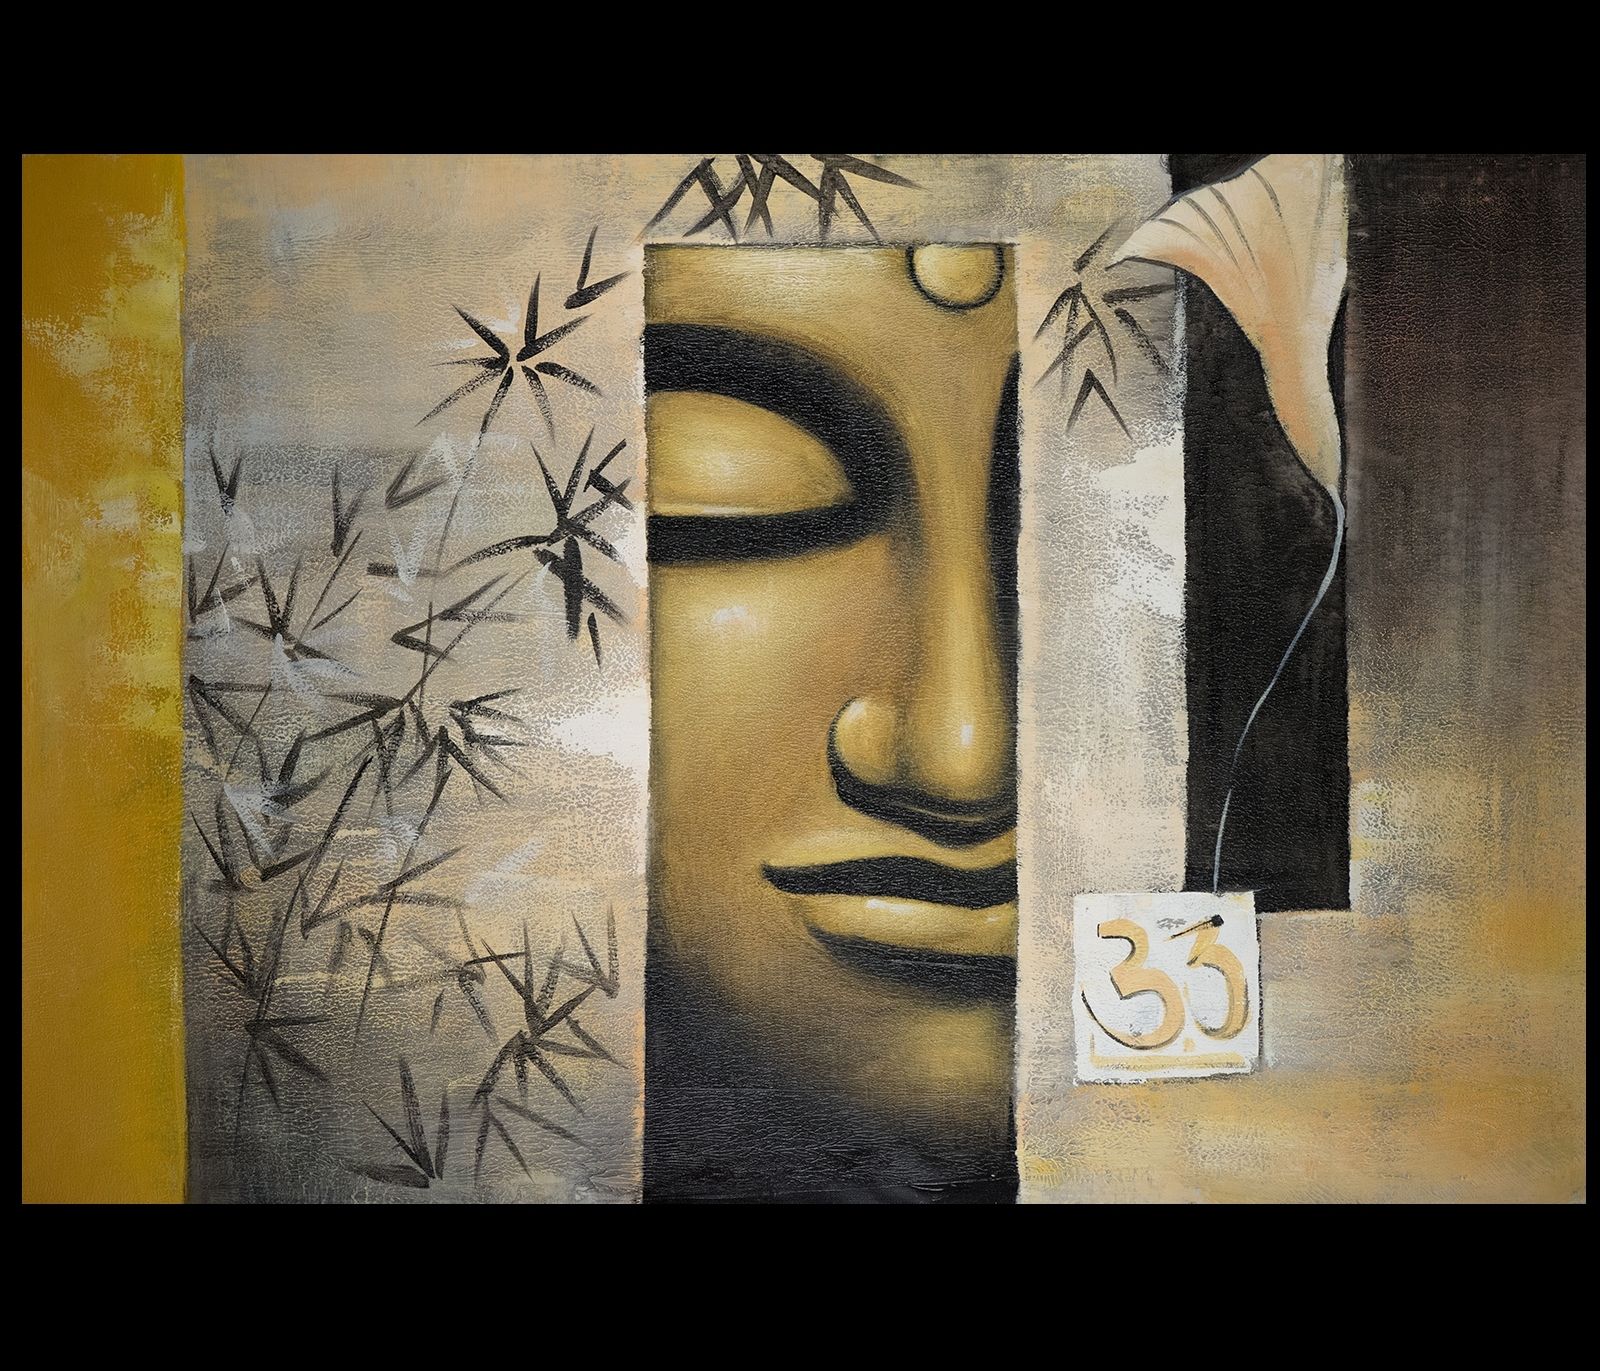 B004hk8wz4 Canvas Wall Art Modern Contemporary Abstract Art Framed Within Most Popular Abstract Buddha Wall Art (View 1 of 20)